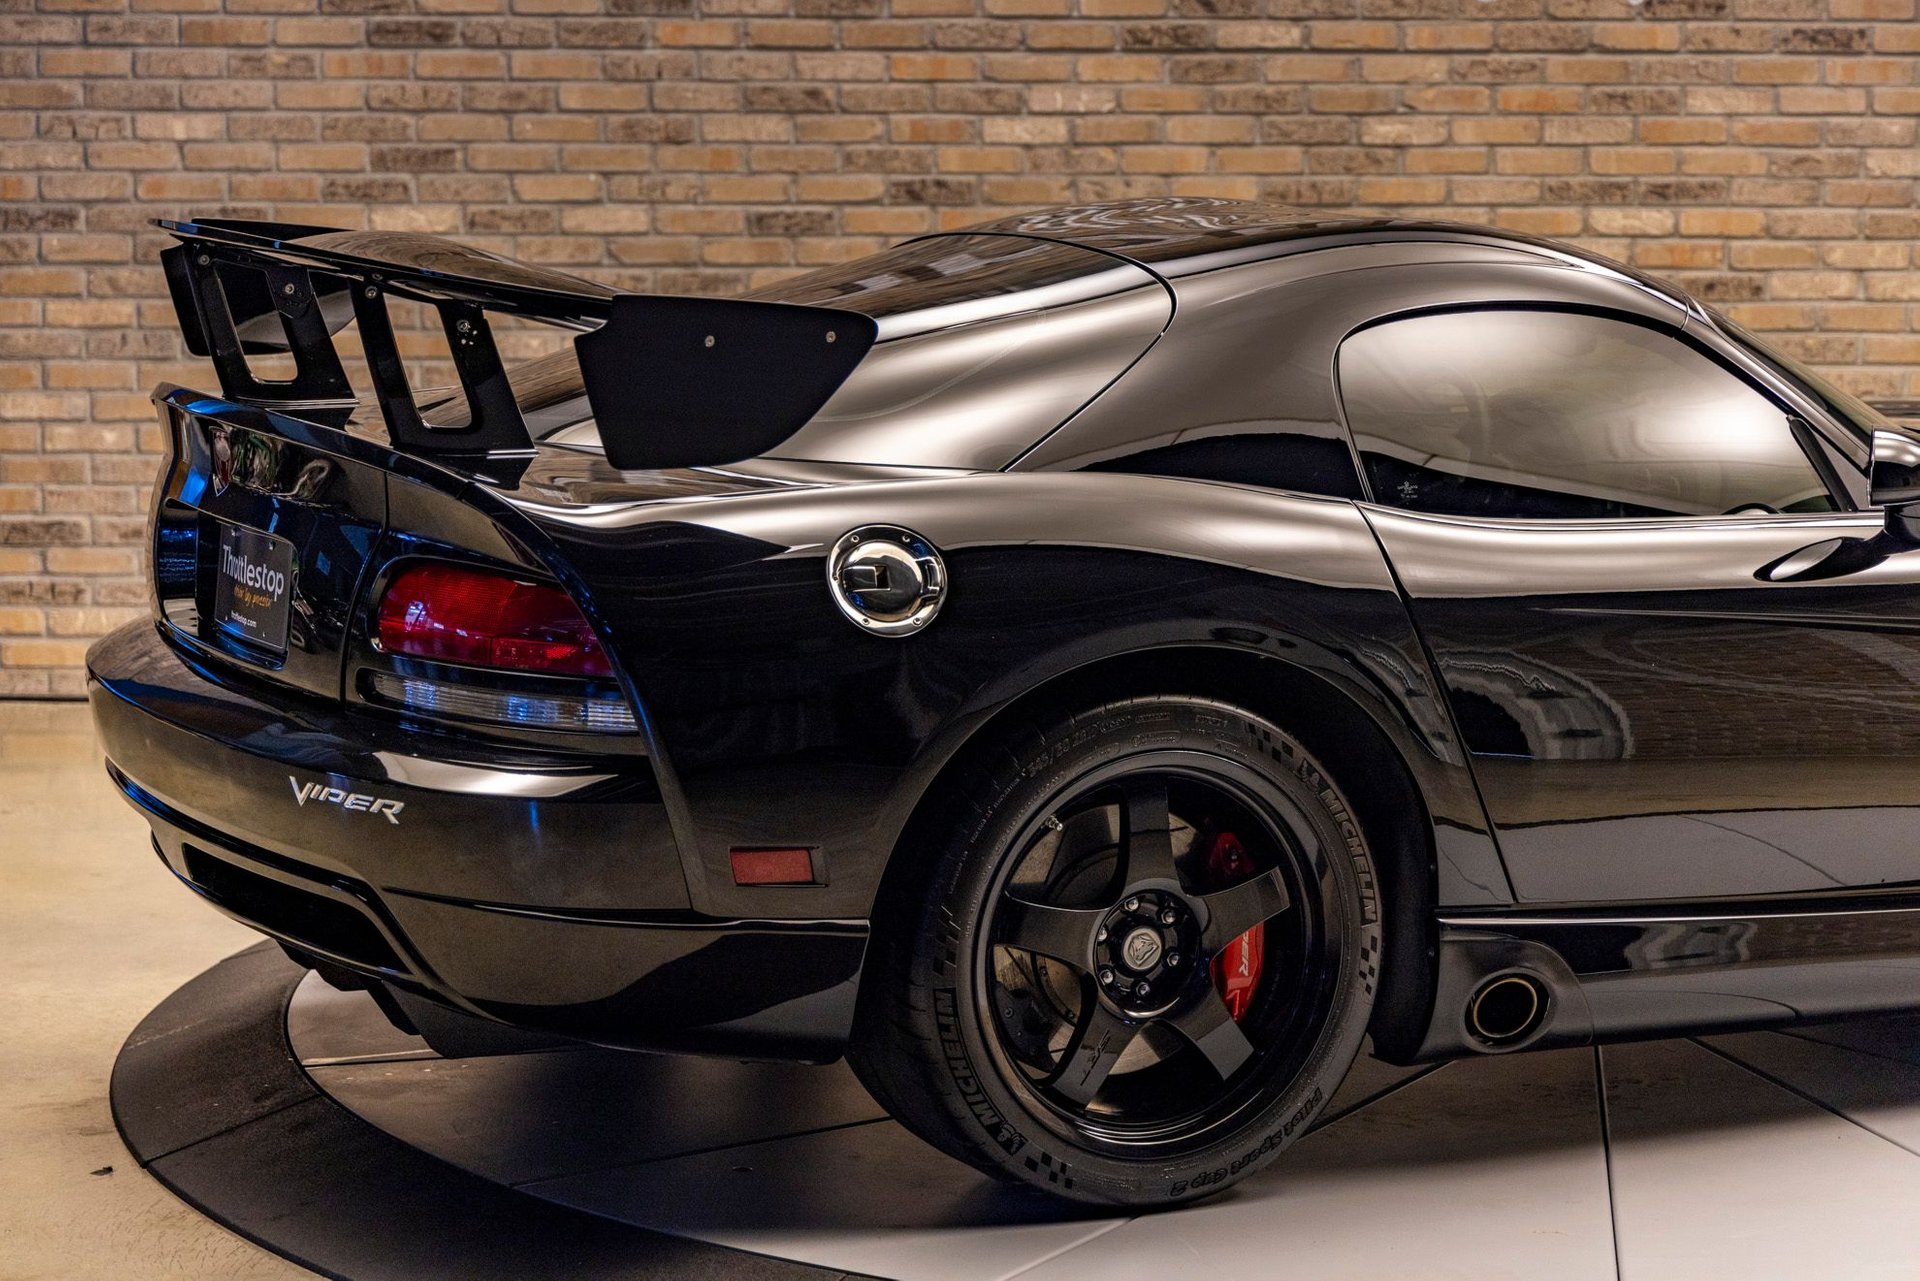 813228 | 2009 Dodge Viper ACR | Throttlestop | Automotive and Motorcycle Consignment Dealer